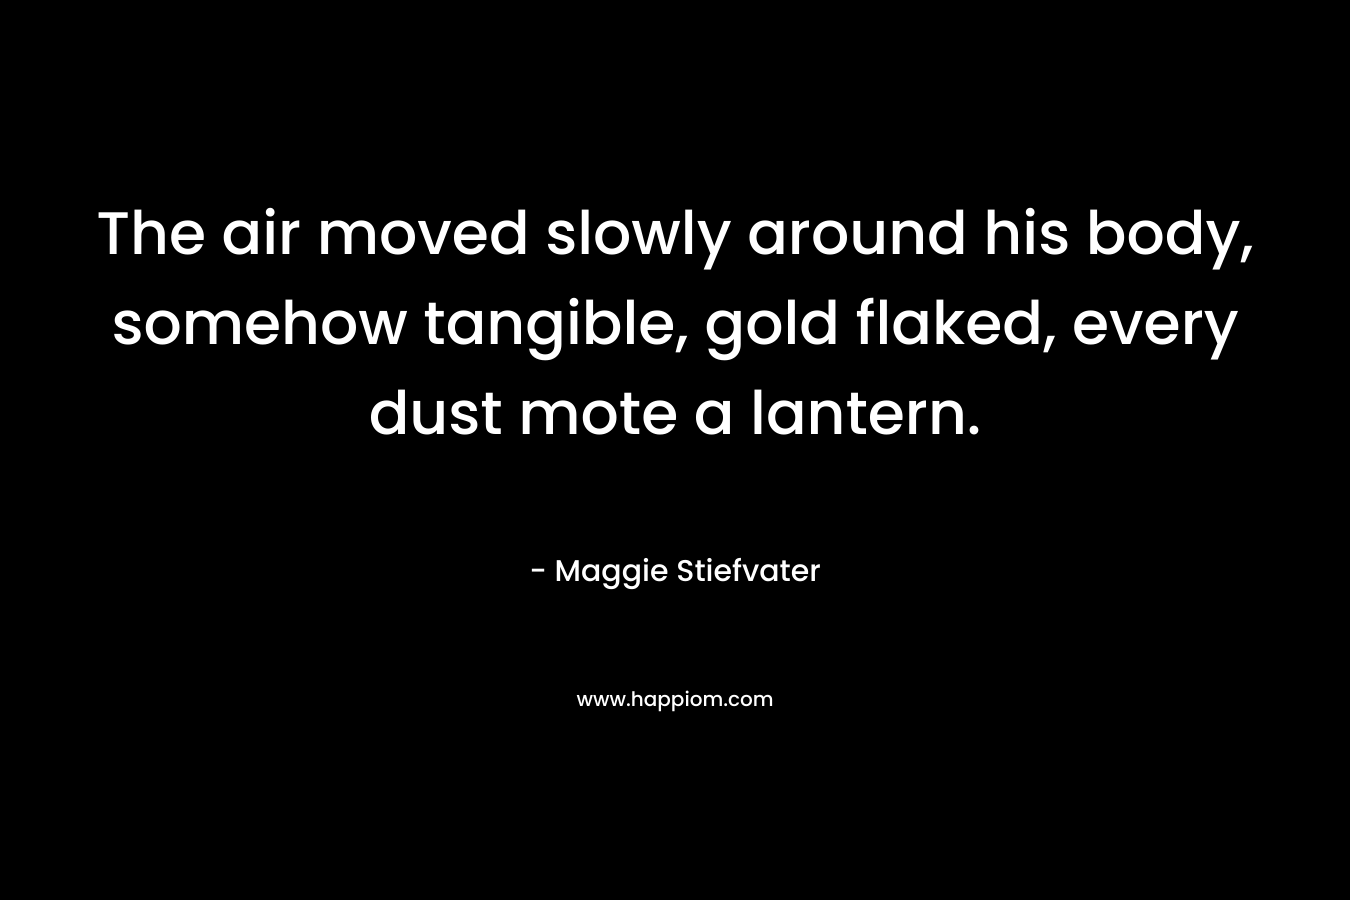 The air moved slowly around his body, somehow tangible, gold flaked, every dust mote a lantern. – Maggie Stiefvater